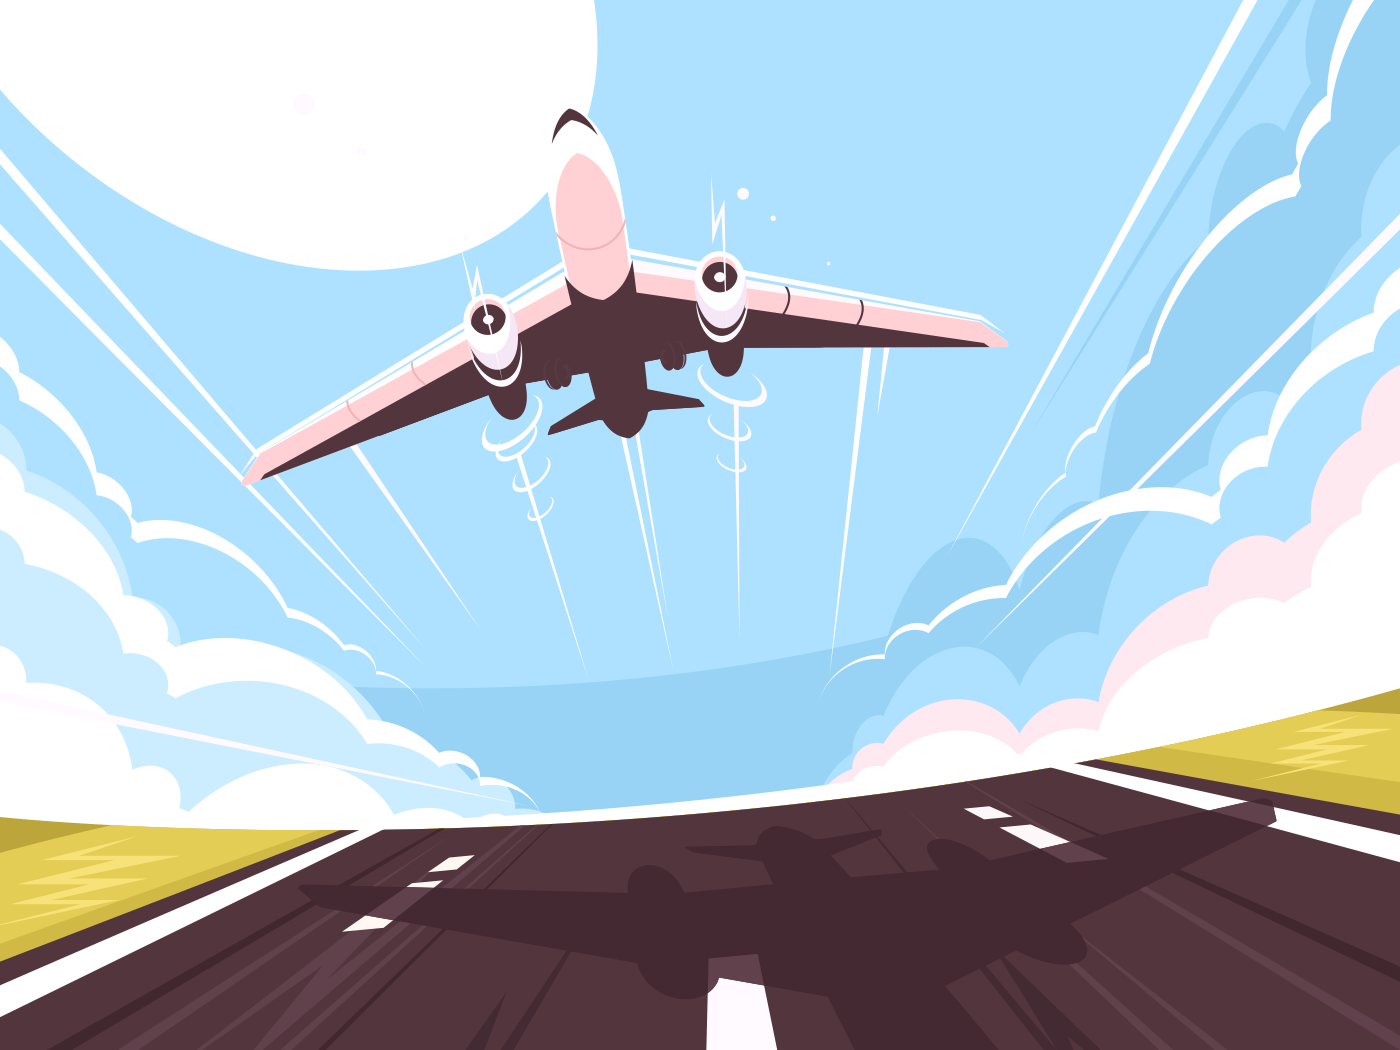 Passenger plane takes off from runway. Air transport, vector illustration